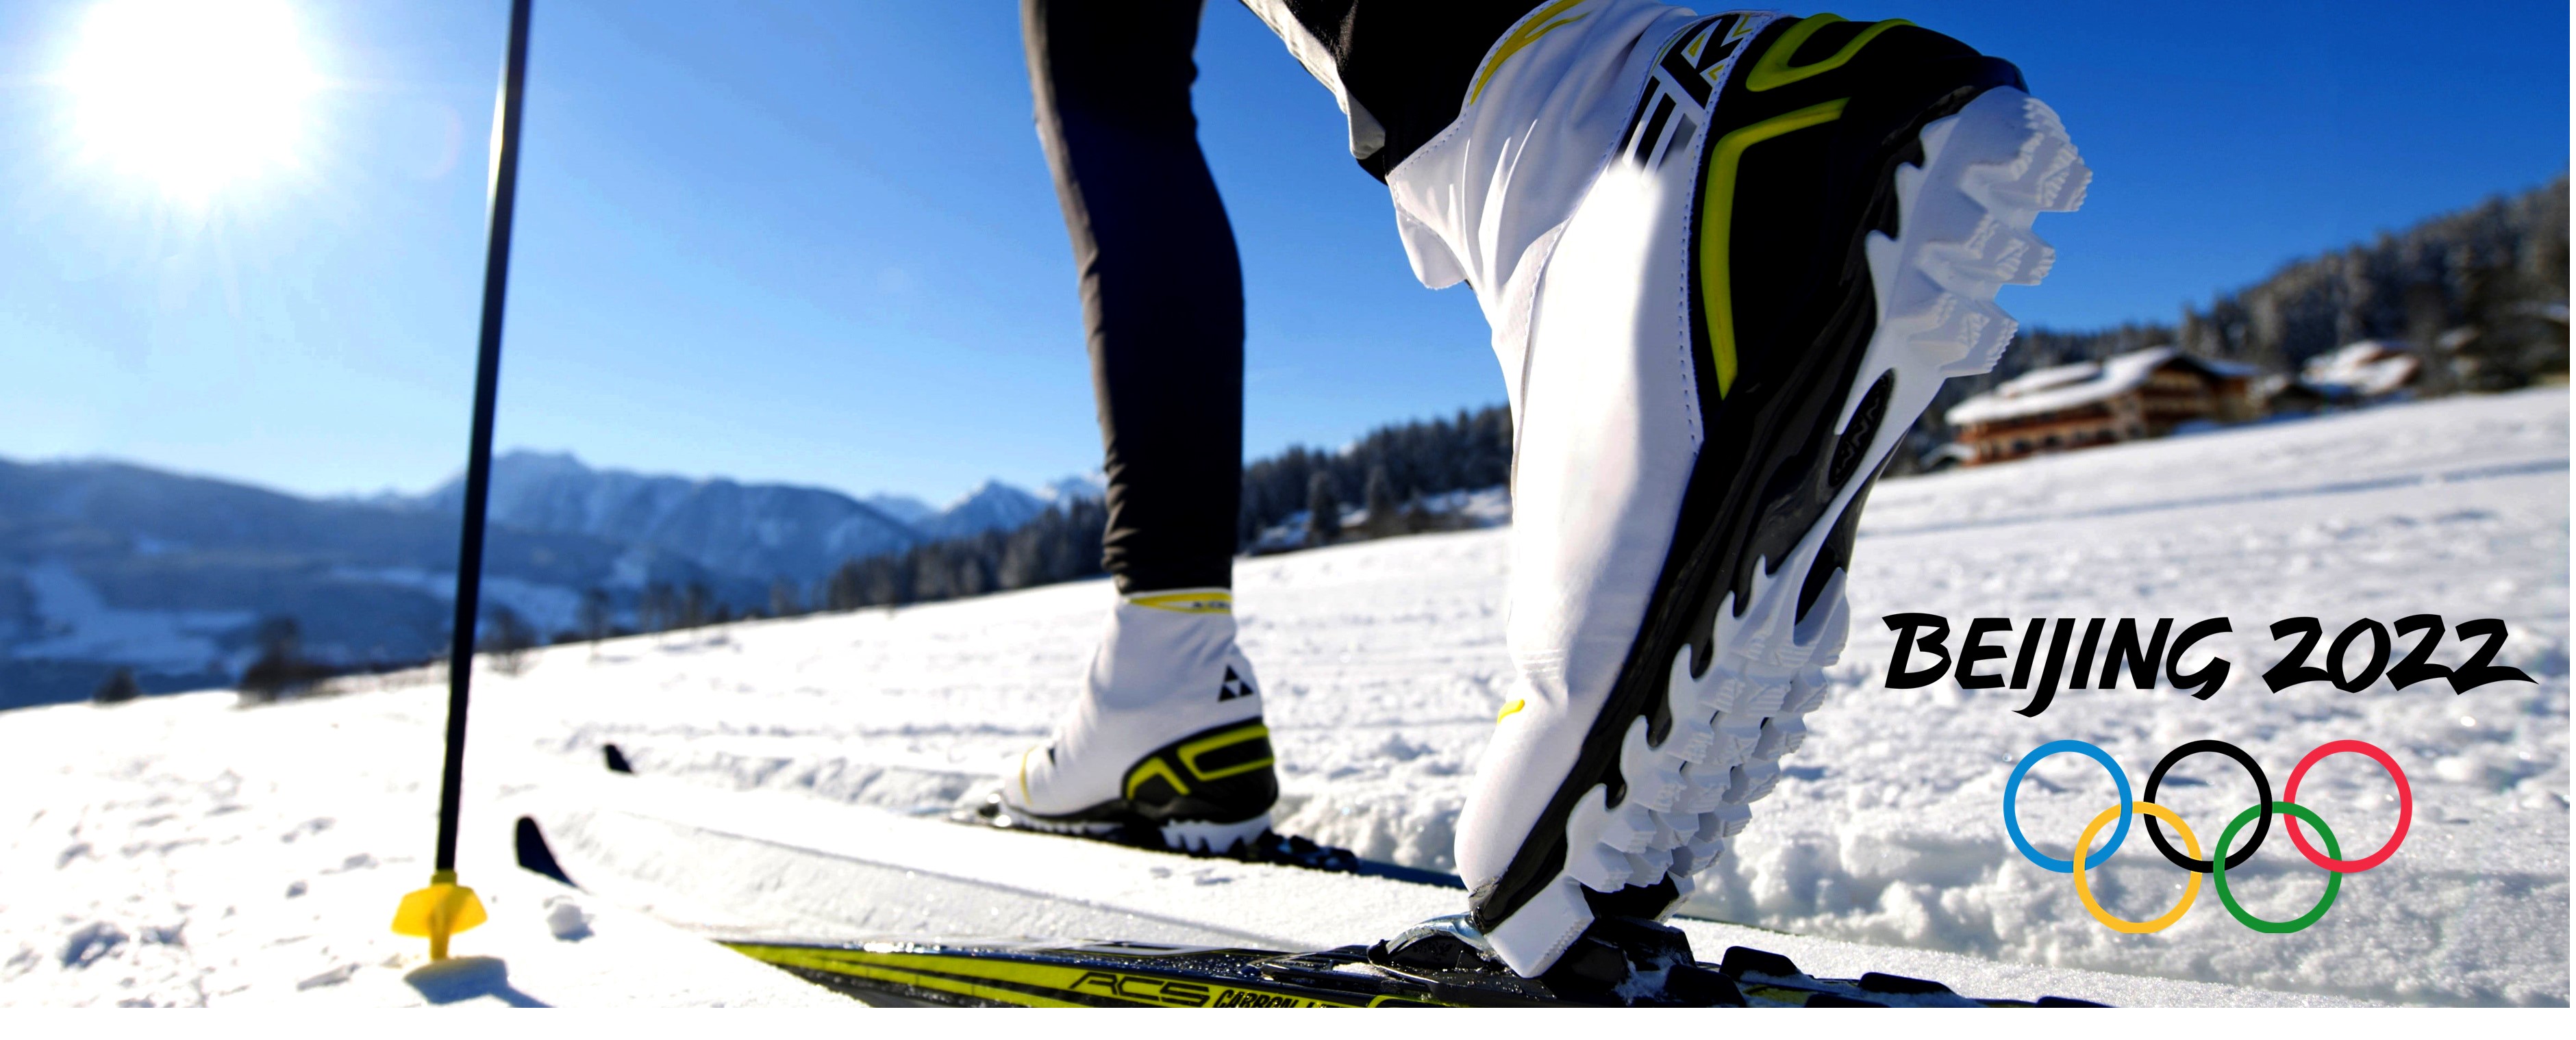 AUSTRALIAN ATHLETES ARE PREPARING FOR ALL ASPECTS OF THE WINTER